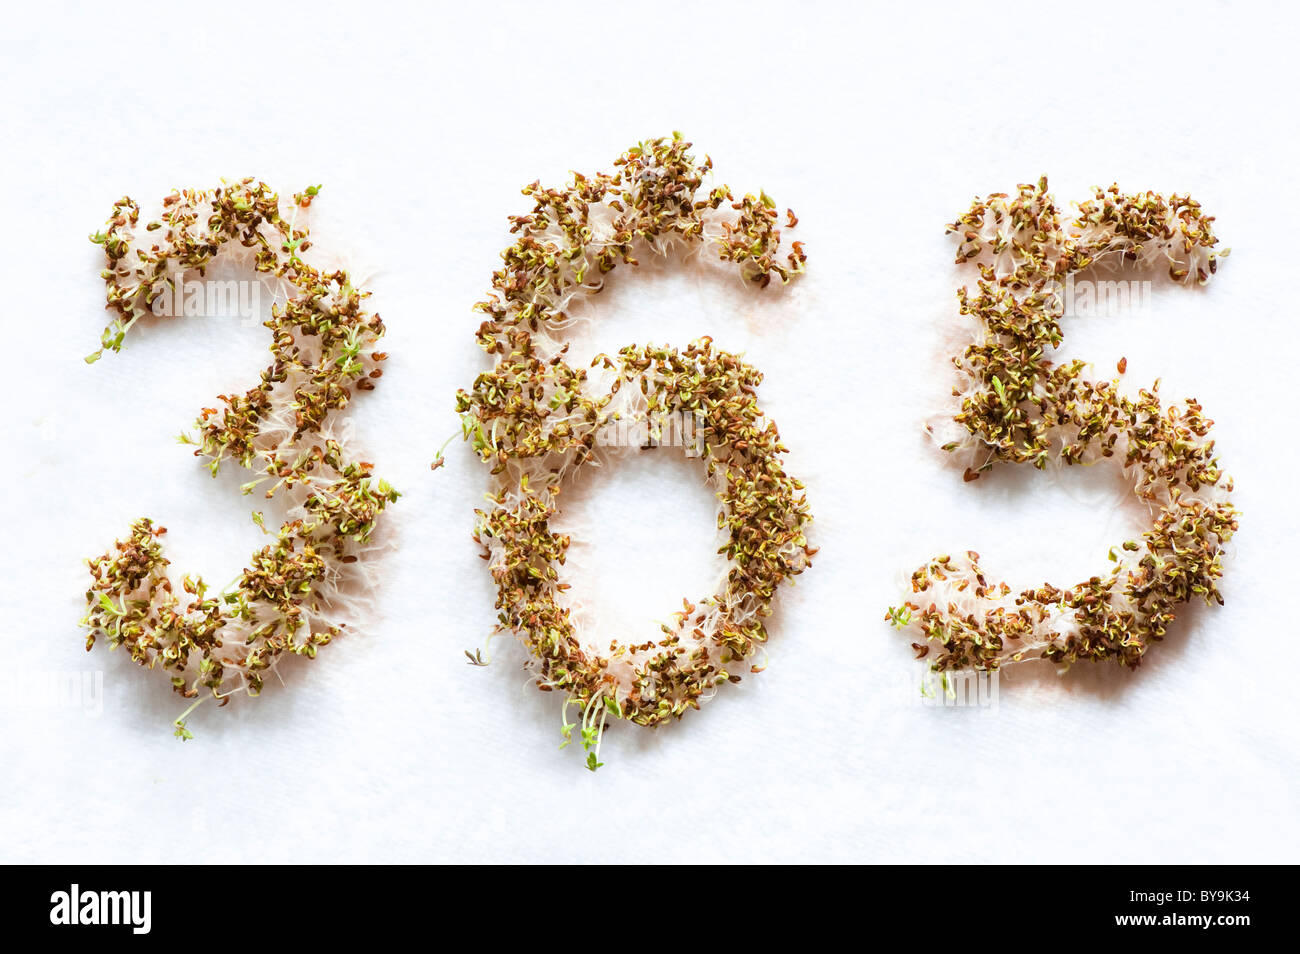 Curled Cress, Lepidium sativum, growing in the shapes of the numbers 3 6 and 5 Stock Photo